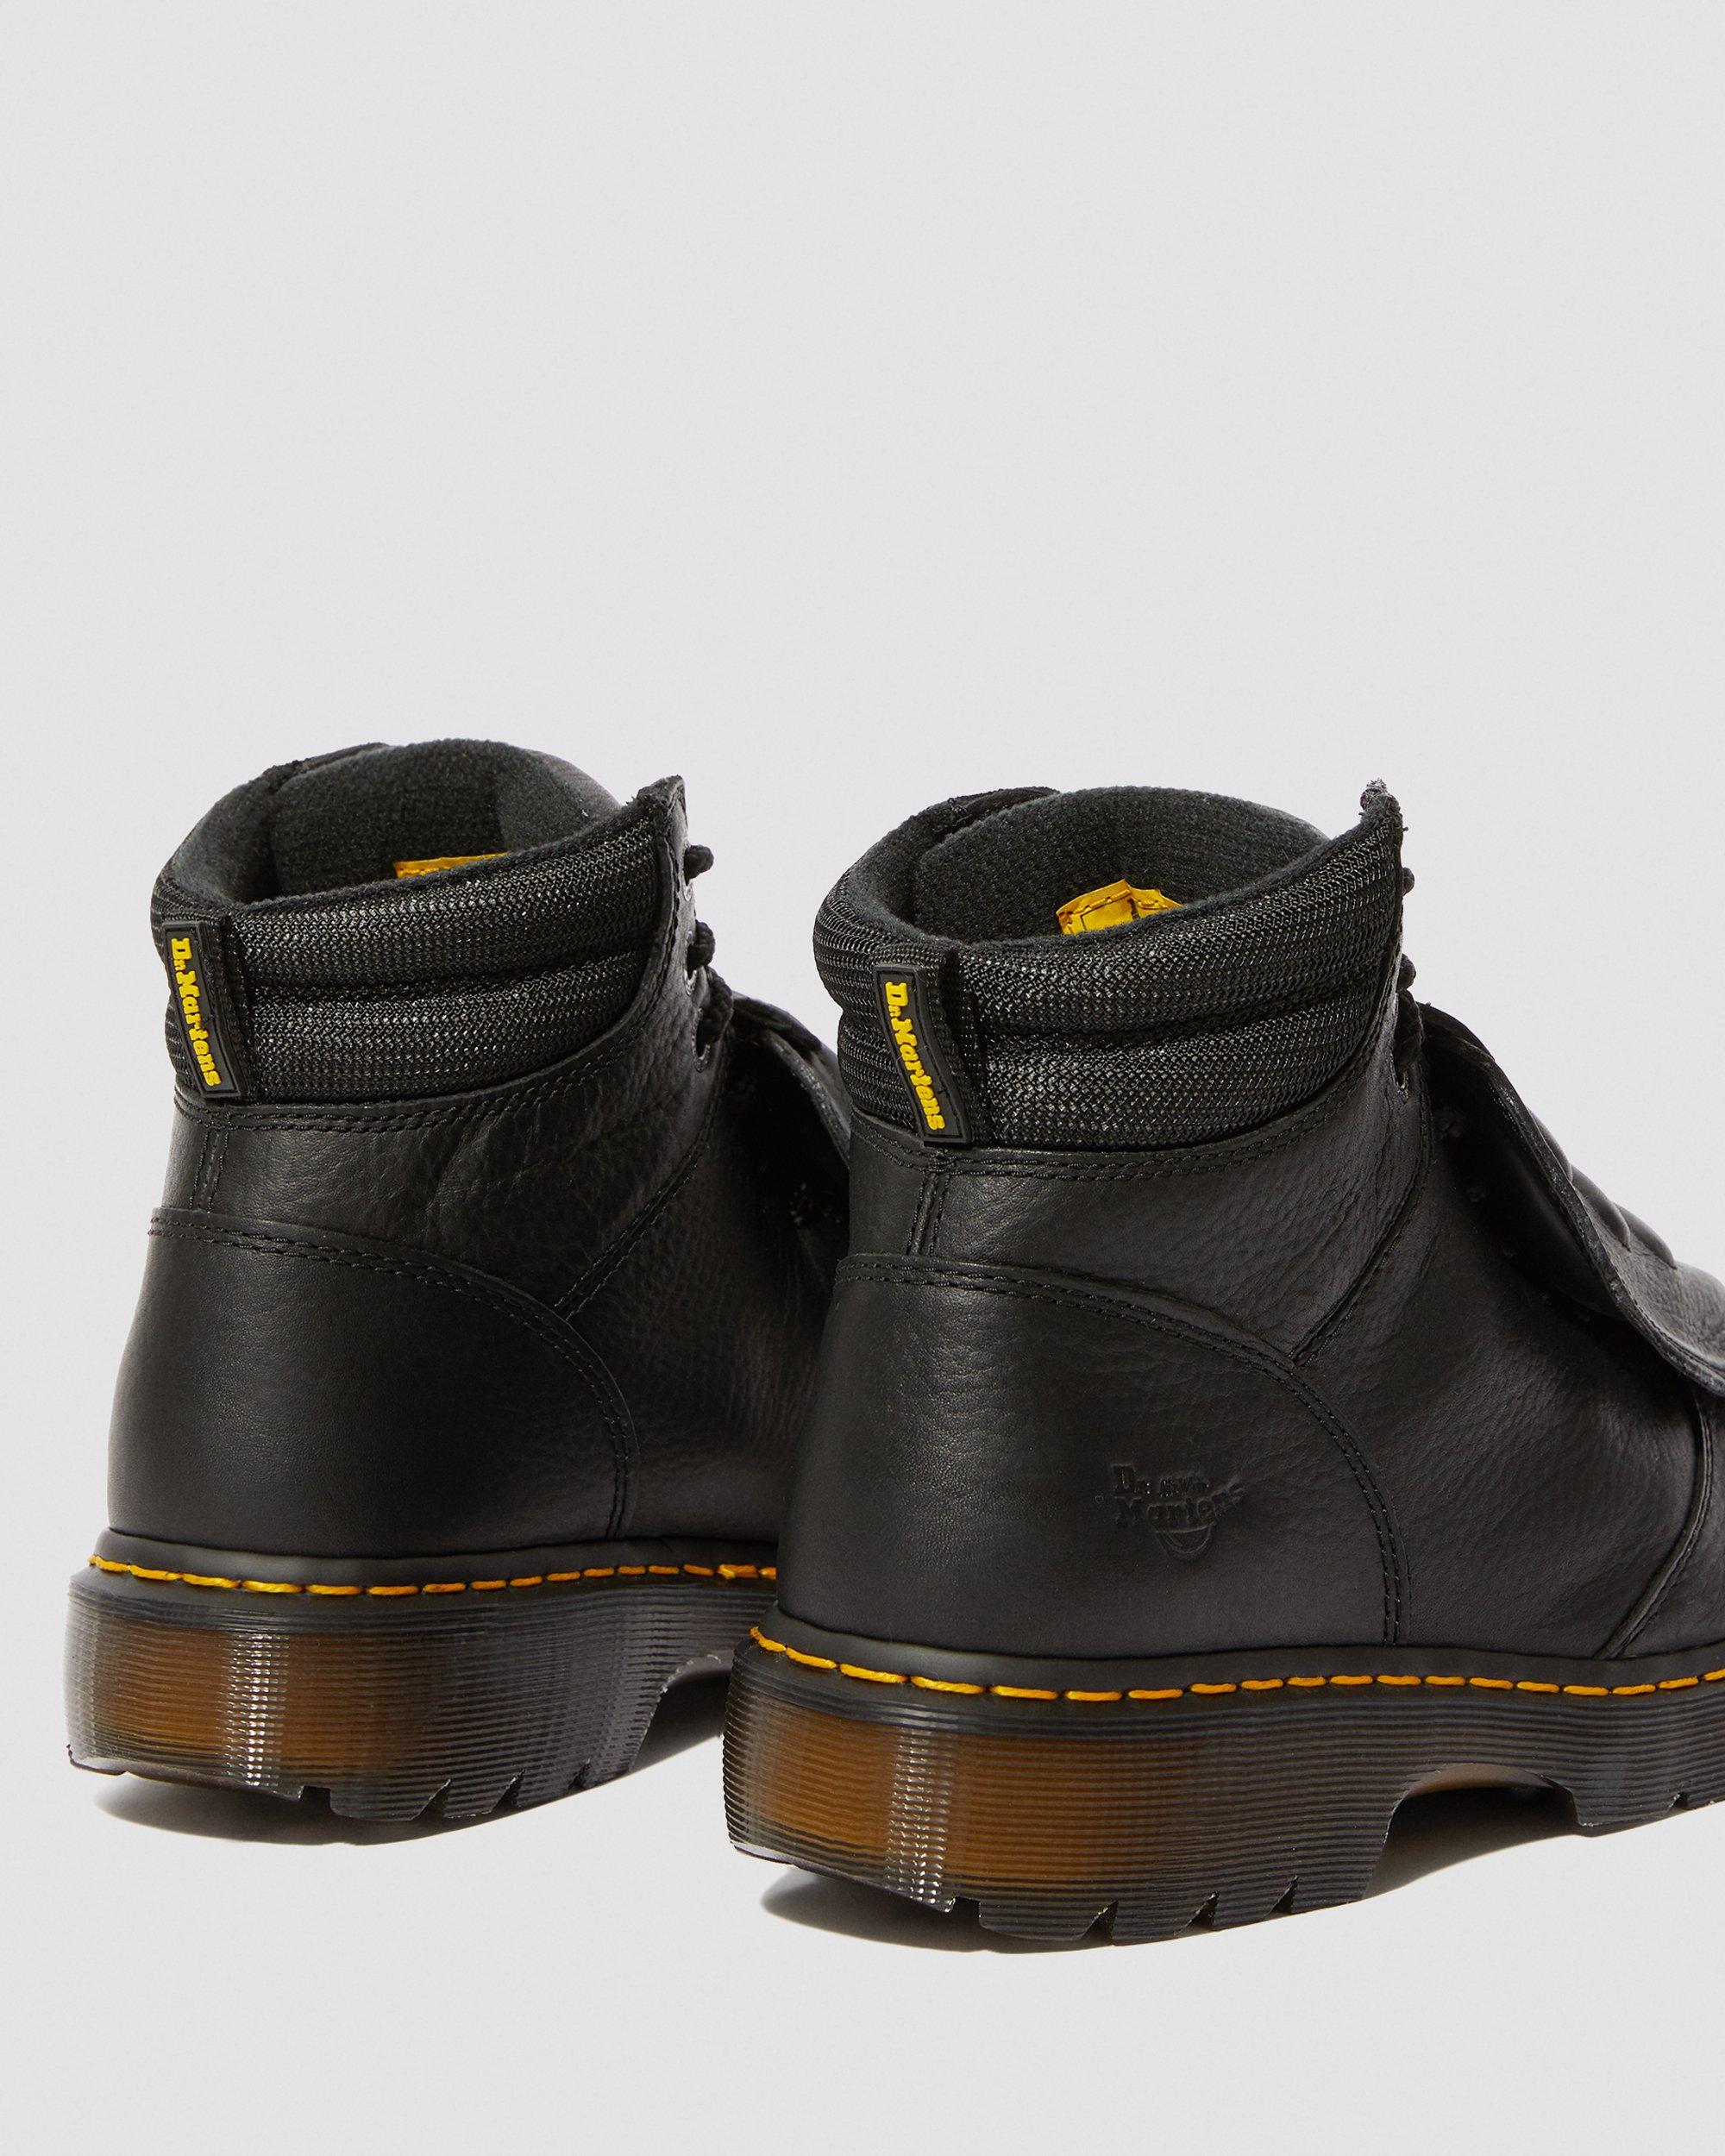 dr martens healy grizzly